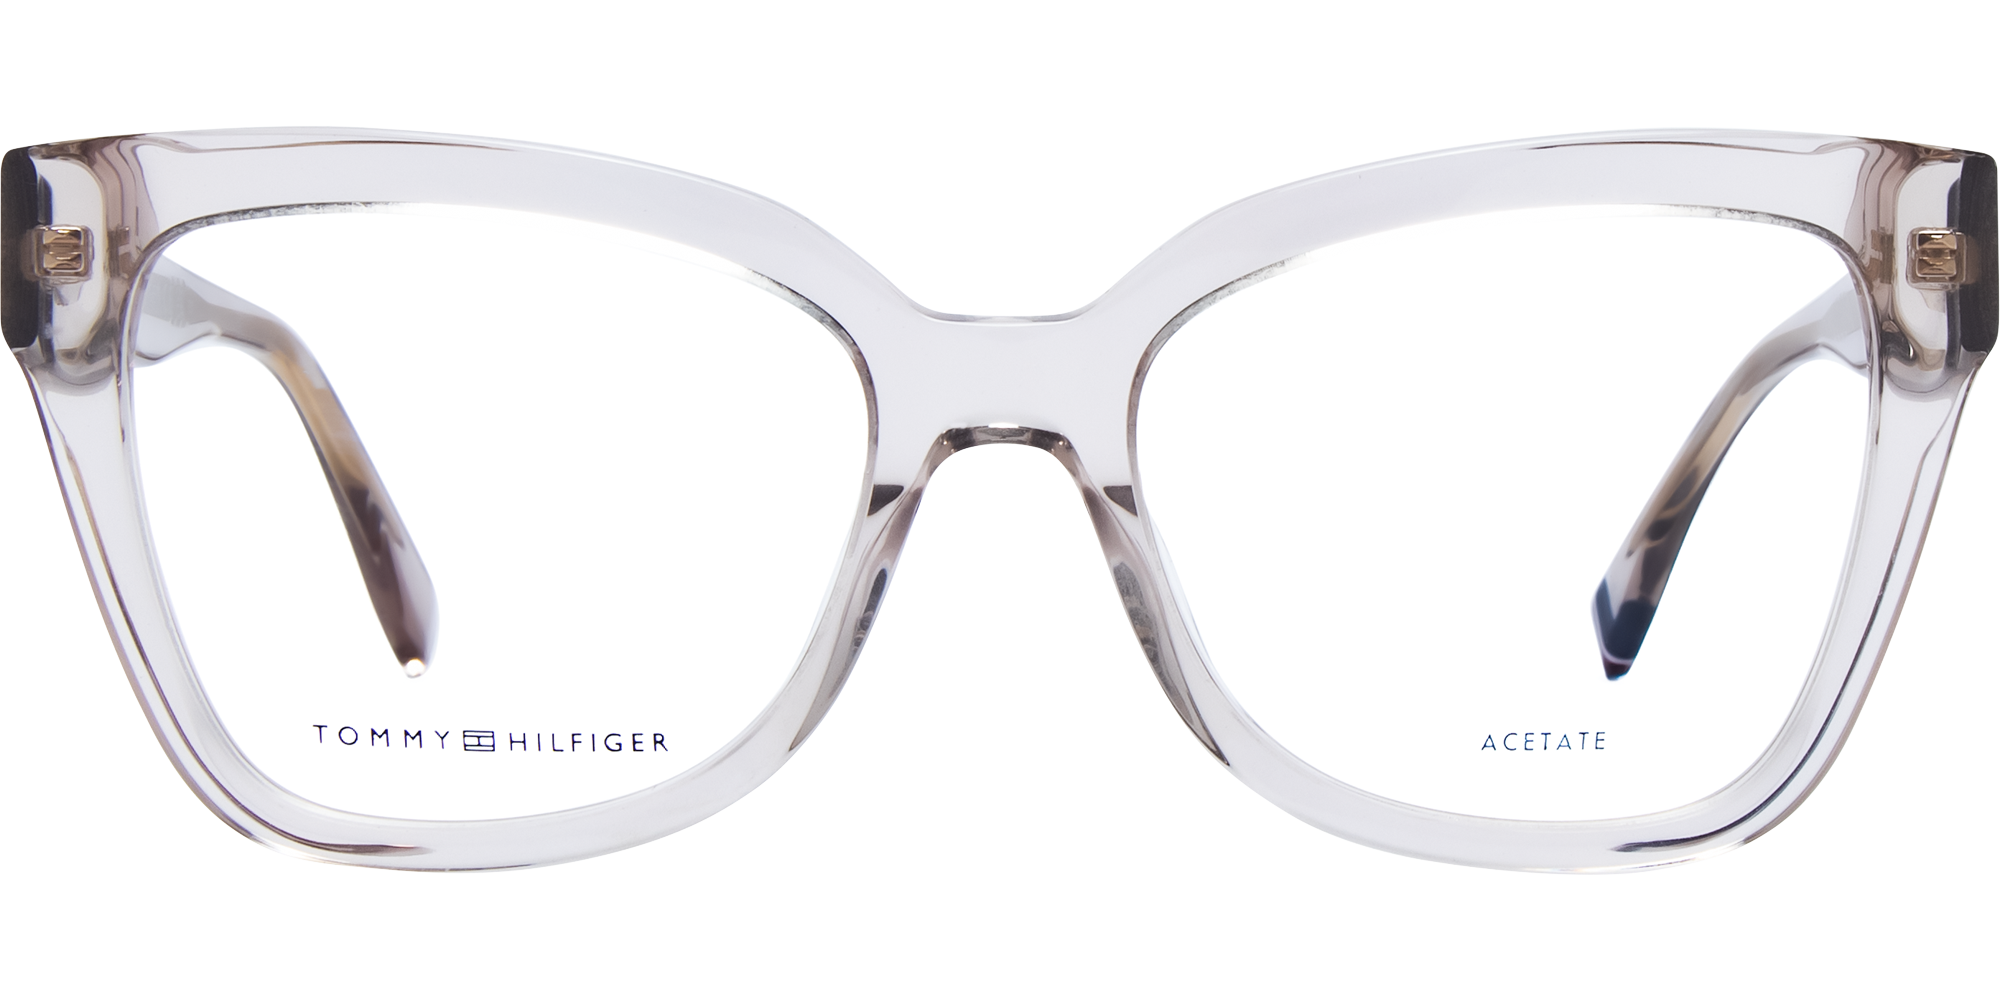 Tommy Hilfiger TH 2053 image number null